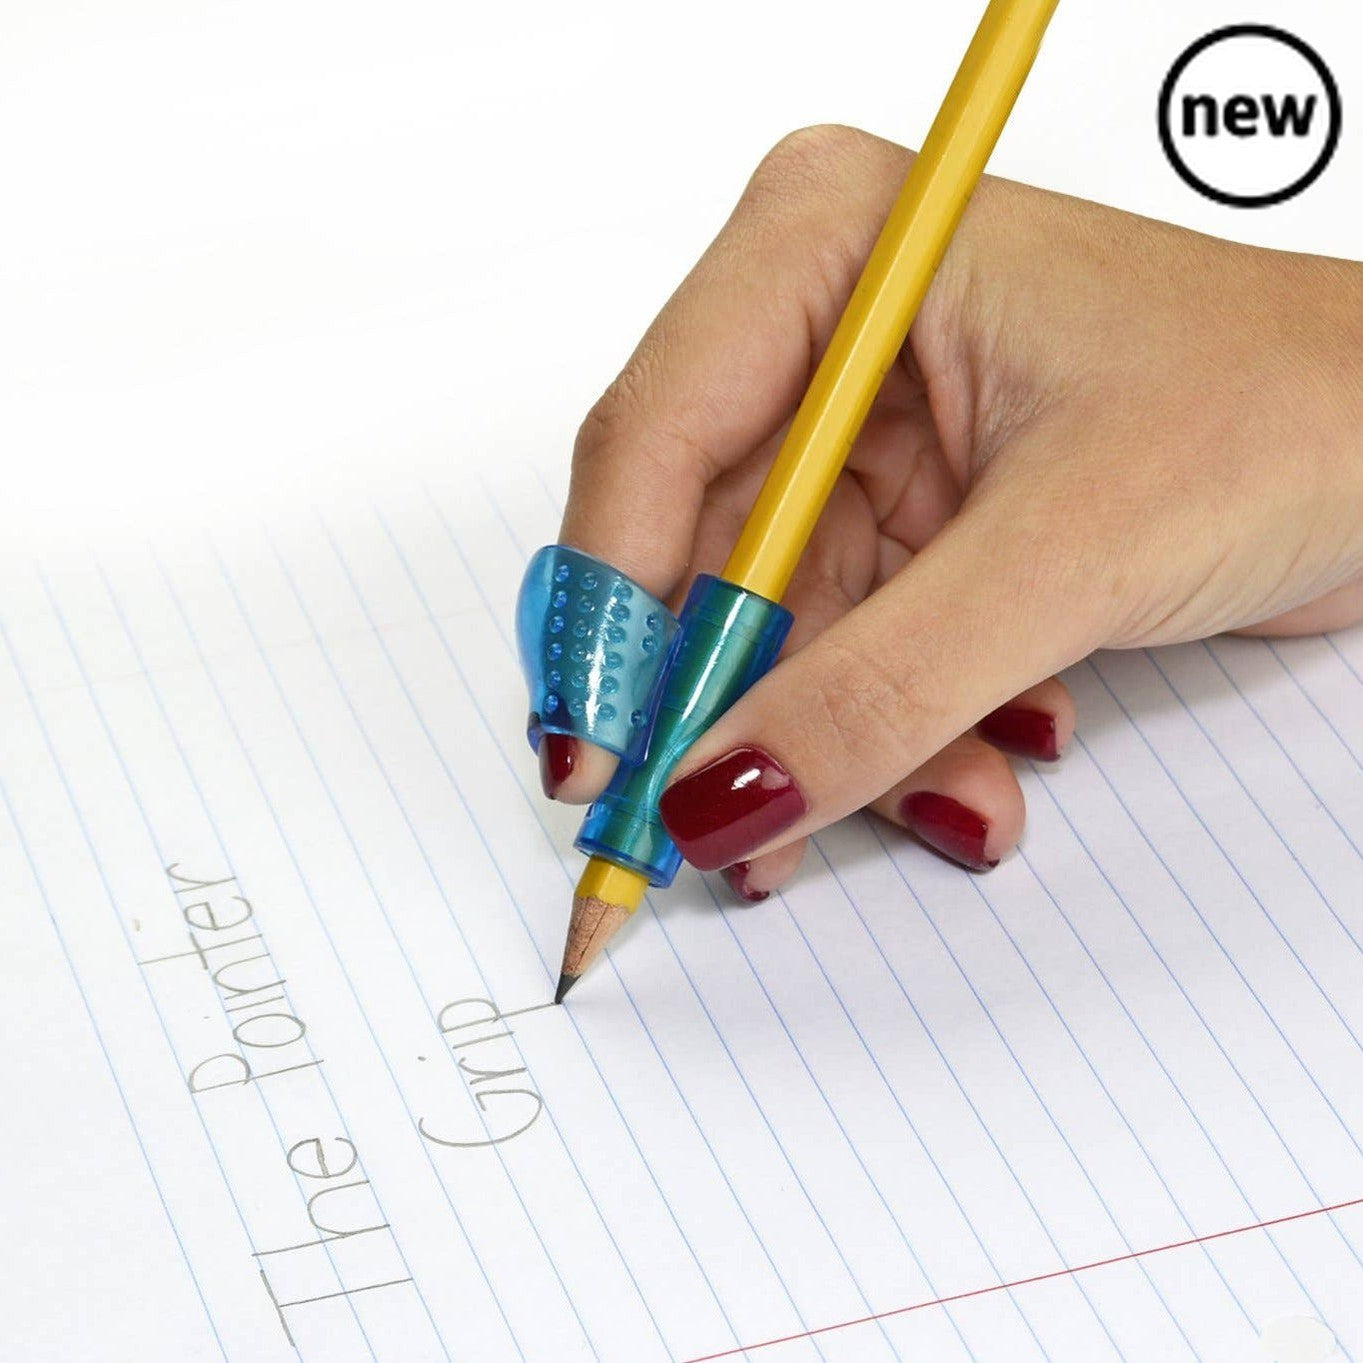 Pointer Pencil Grip - Pack of 6, The Pointer Grip is designed for proper pencil grip development. The Pointer Pencil Grip is recommended particularly for the Early Childhood stage. The Pointer Grip offers the perfect support for the pointer finger, and once that position is secured, the other two fingers will find naturally the correct position. The Pointer Grip is the optimal aid that will point the handwriting in the right direction! Pointer Pencil Grip The Pointer Grip by Pencil Grip Inc. – Promotes the 